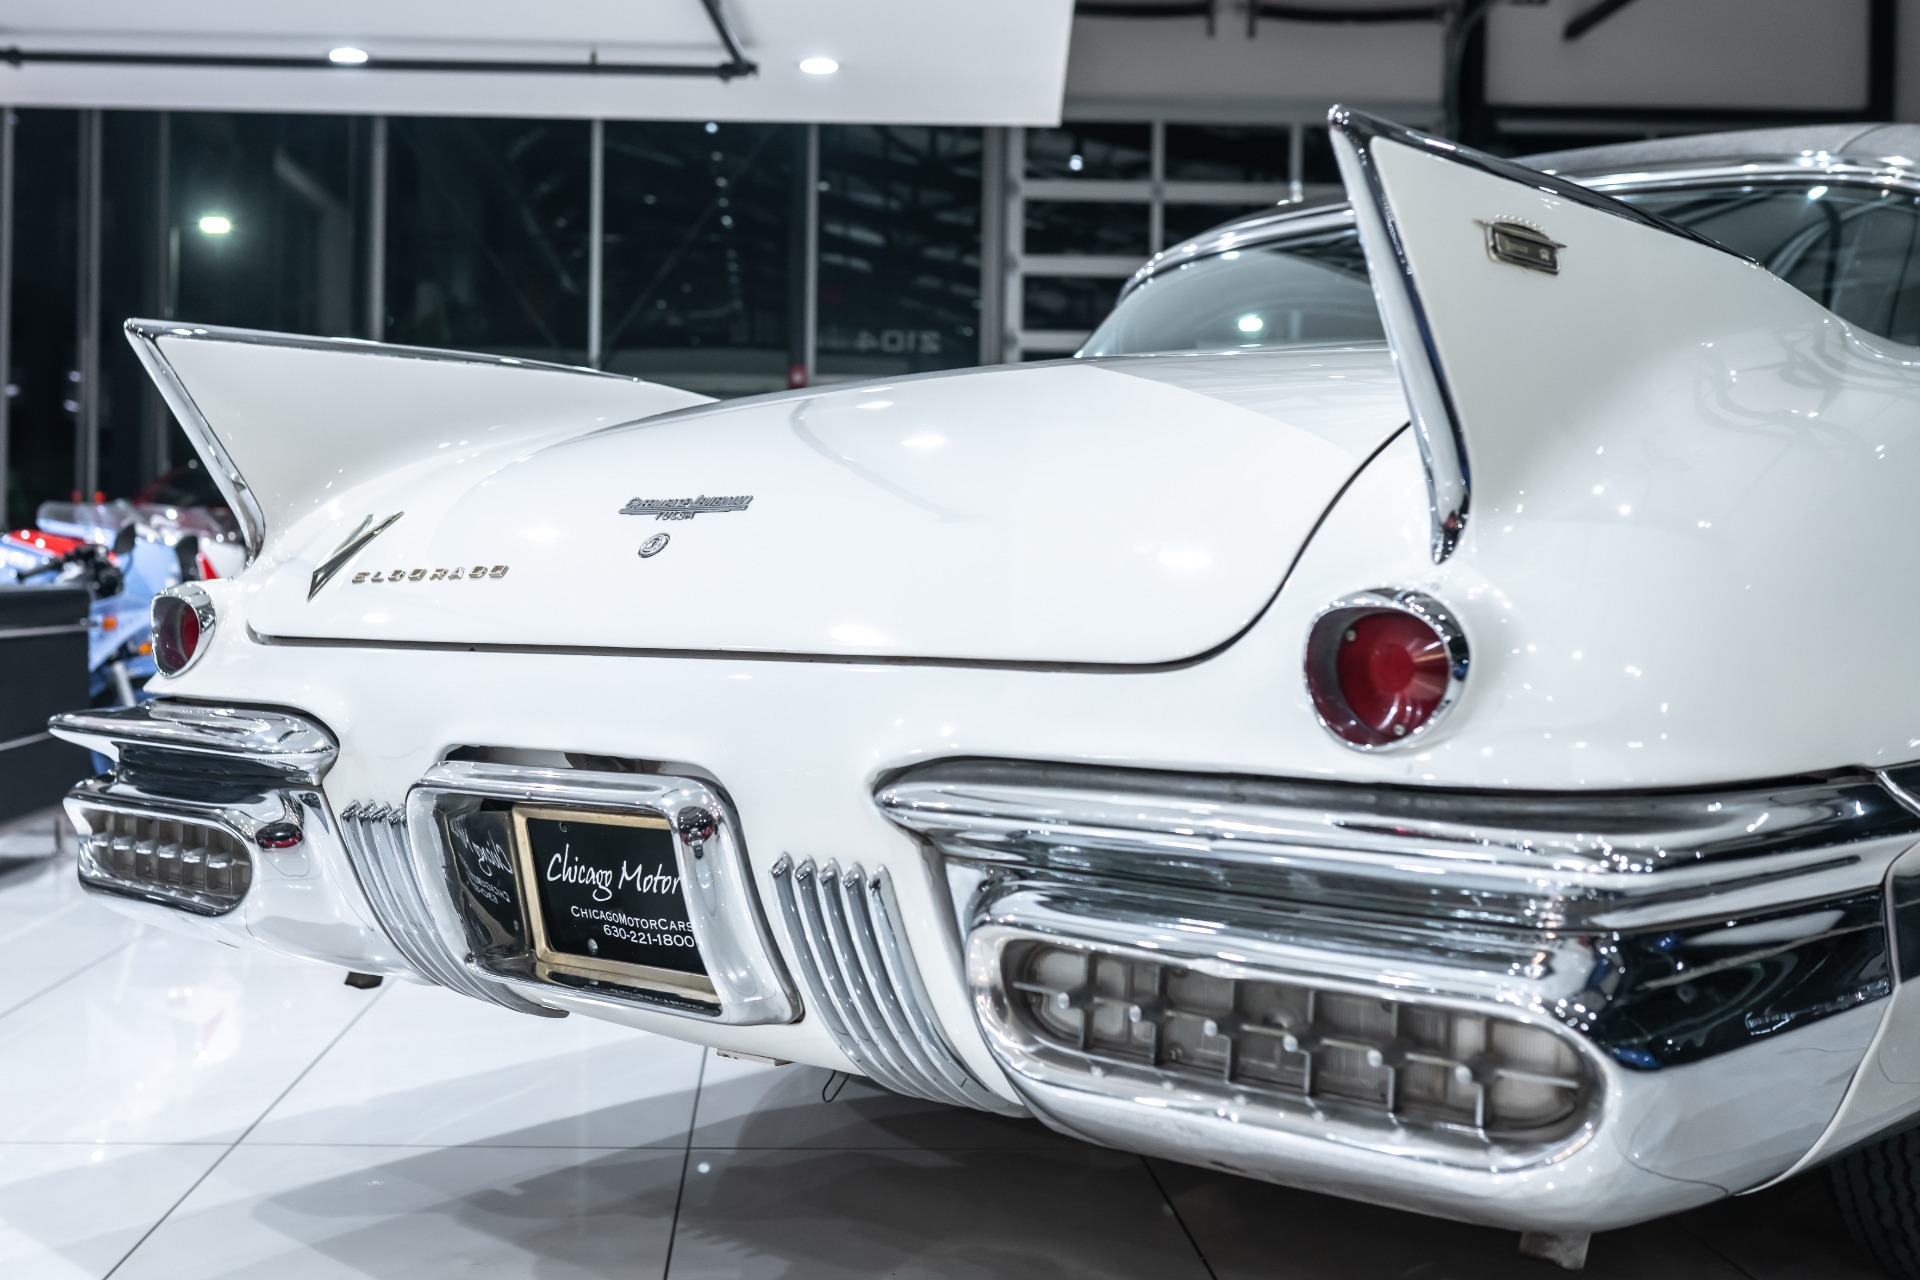 Used 1958 Cadillac Eldorado Seville 2-Door Hardtop 1 of 855 Built! Matching  # Rare Factory A/C Gorgeous Color For Sale ($94,800) | Chicago Motor Cars  Stock #8H001996 DP